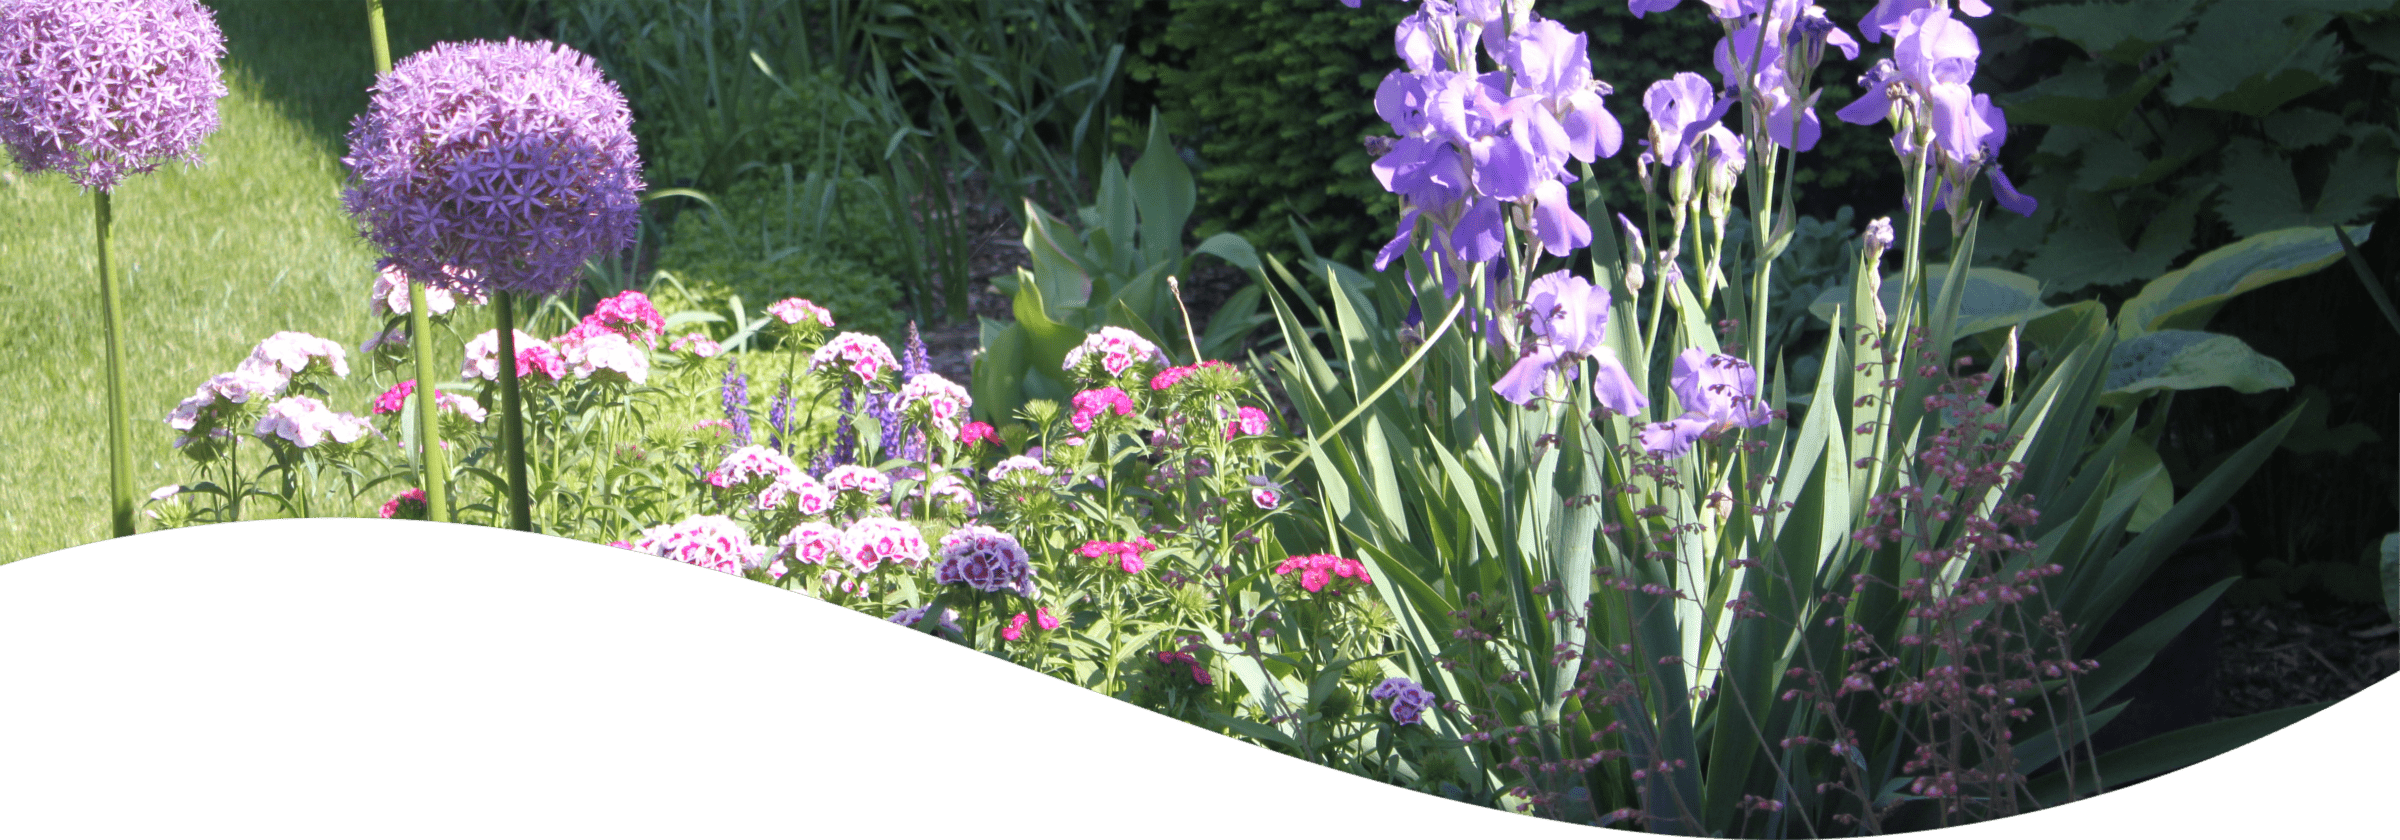 The image shows a lush garden with vibrant purple alliums, pink and purple flowers, greenery, and a neatly trimmed grass lawn.